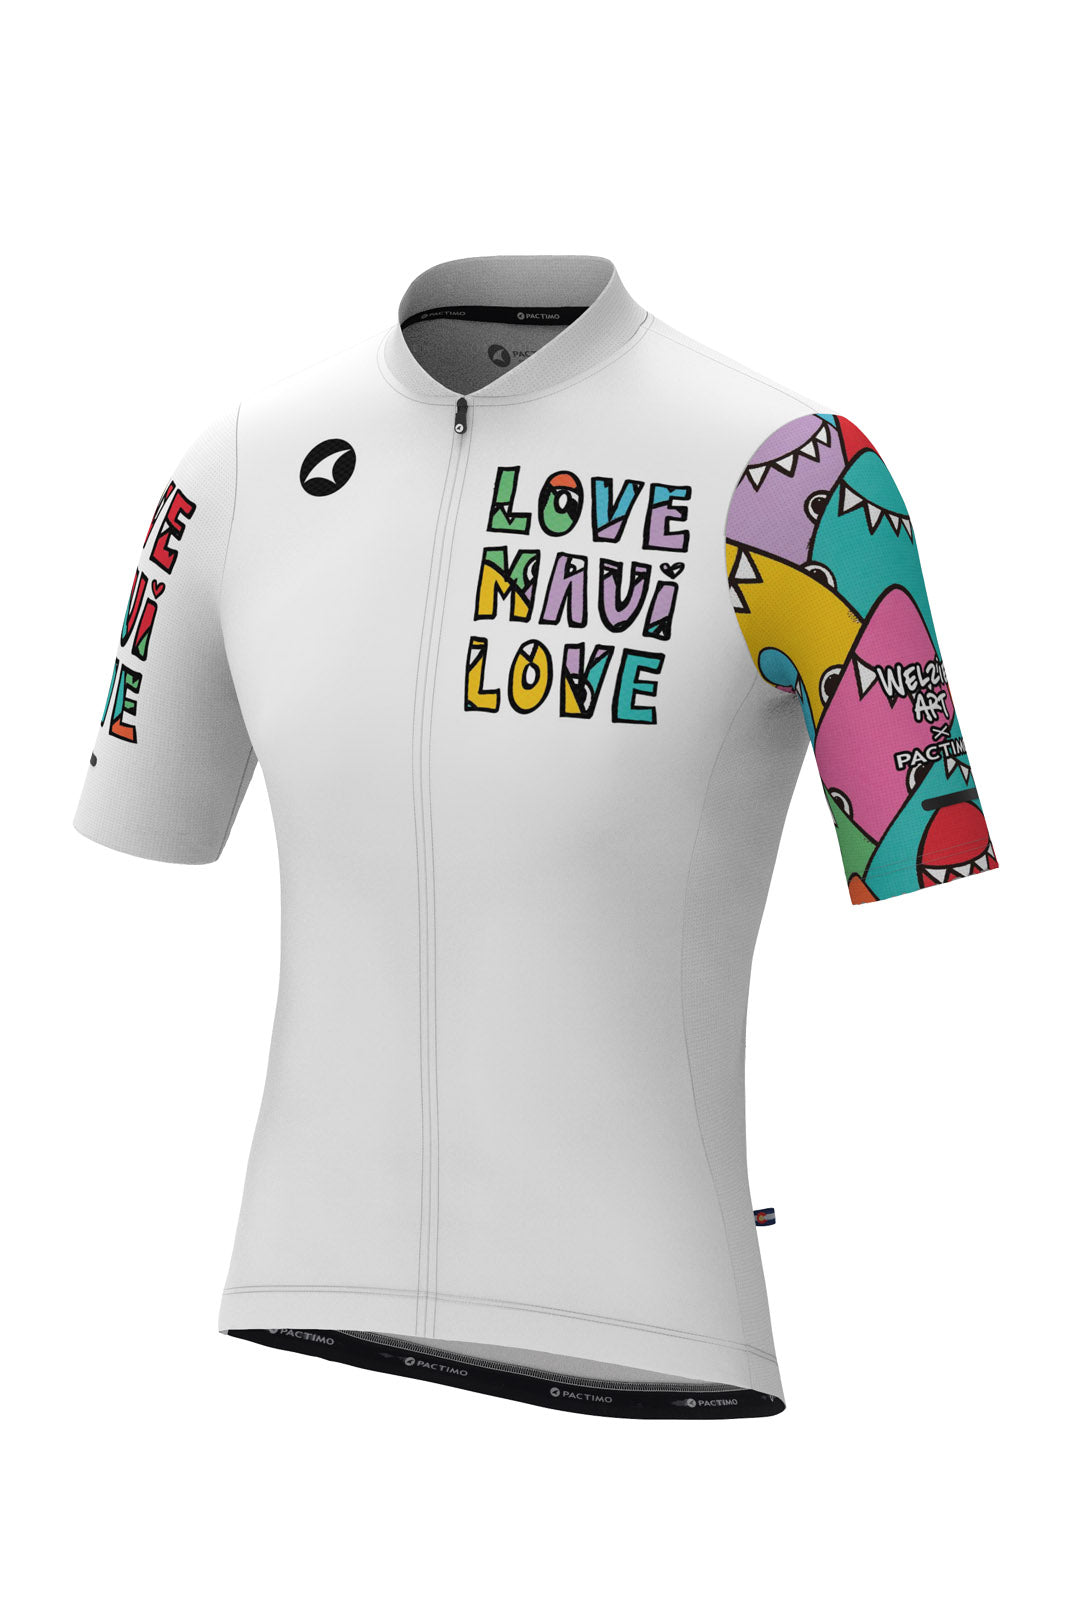 Maui Relief Aero Cycling Jersey for Men - Welzie Design Front View